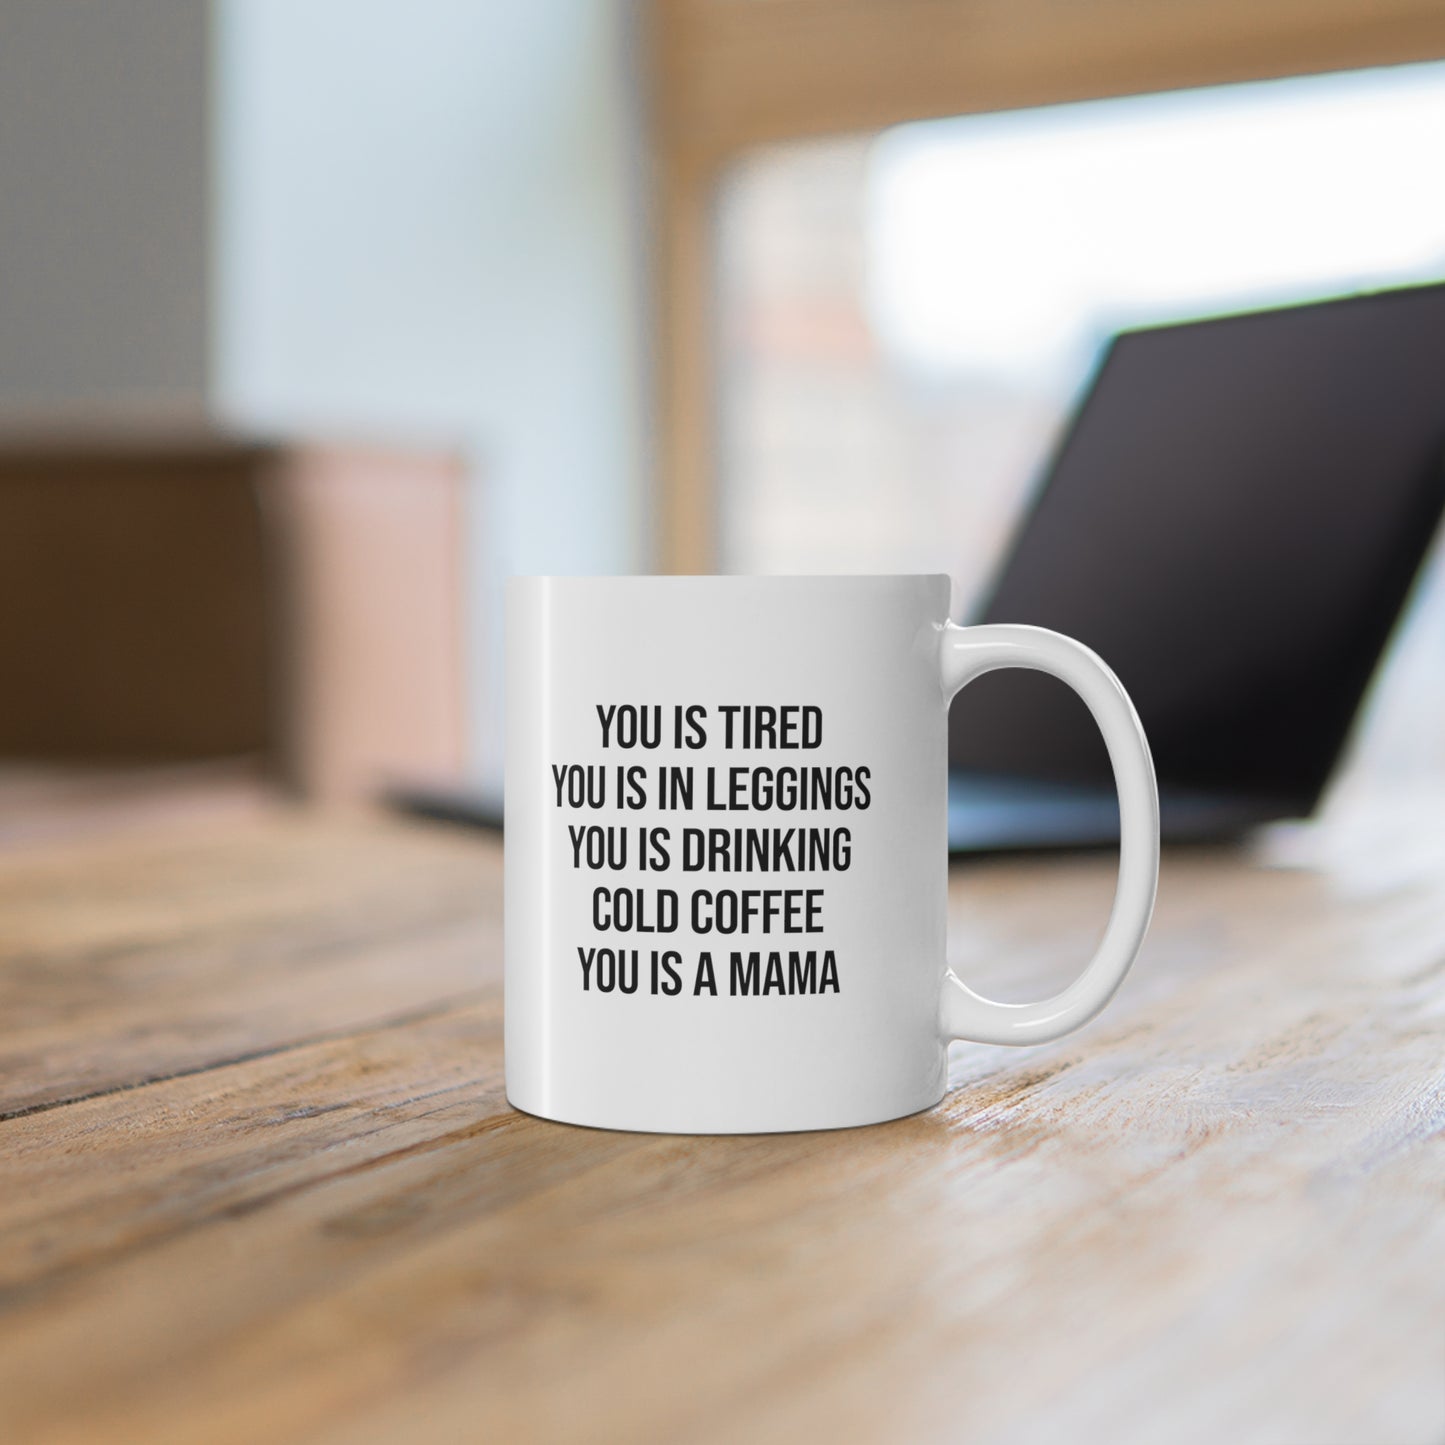 11oz ceramic mug with quote You Is Tired You Is In Leggings You Is Drinking Cold Coffee You Is A Mama